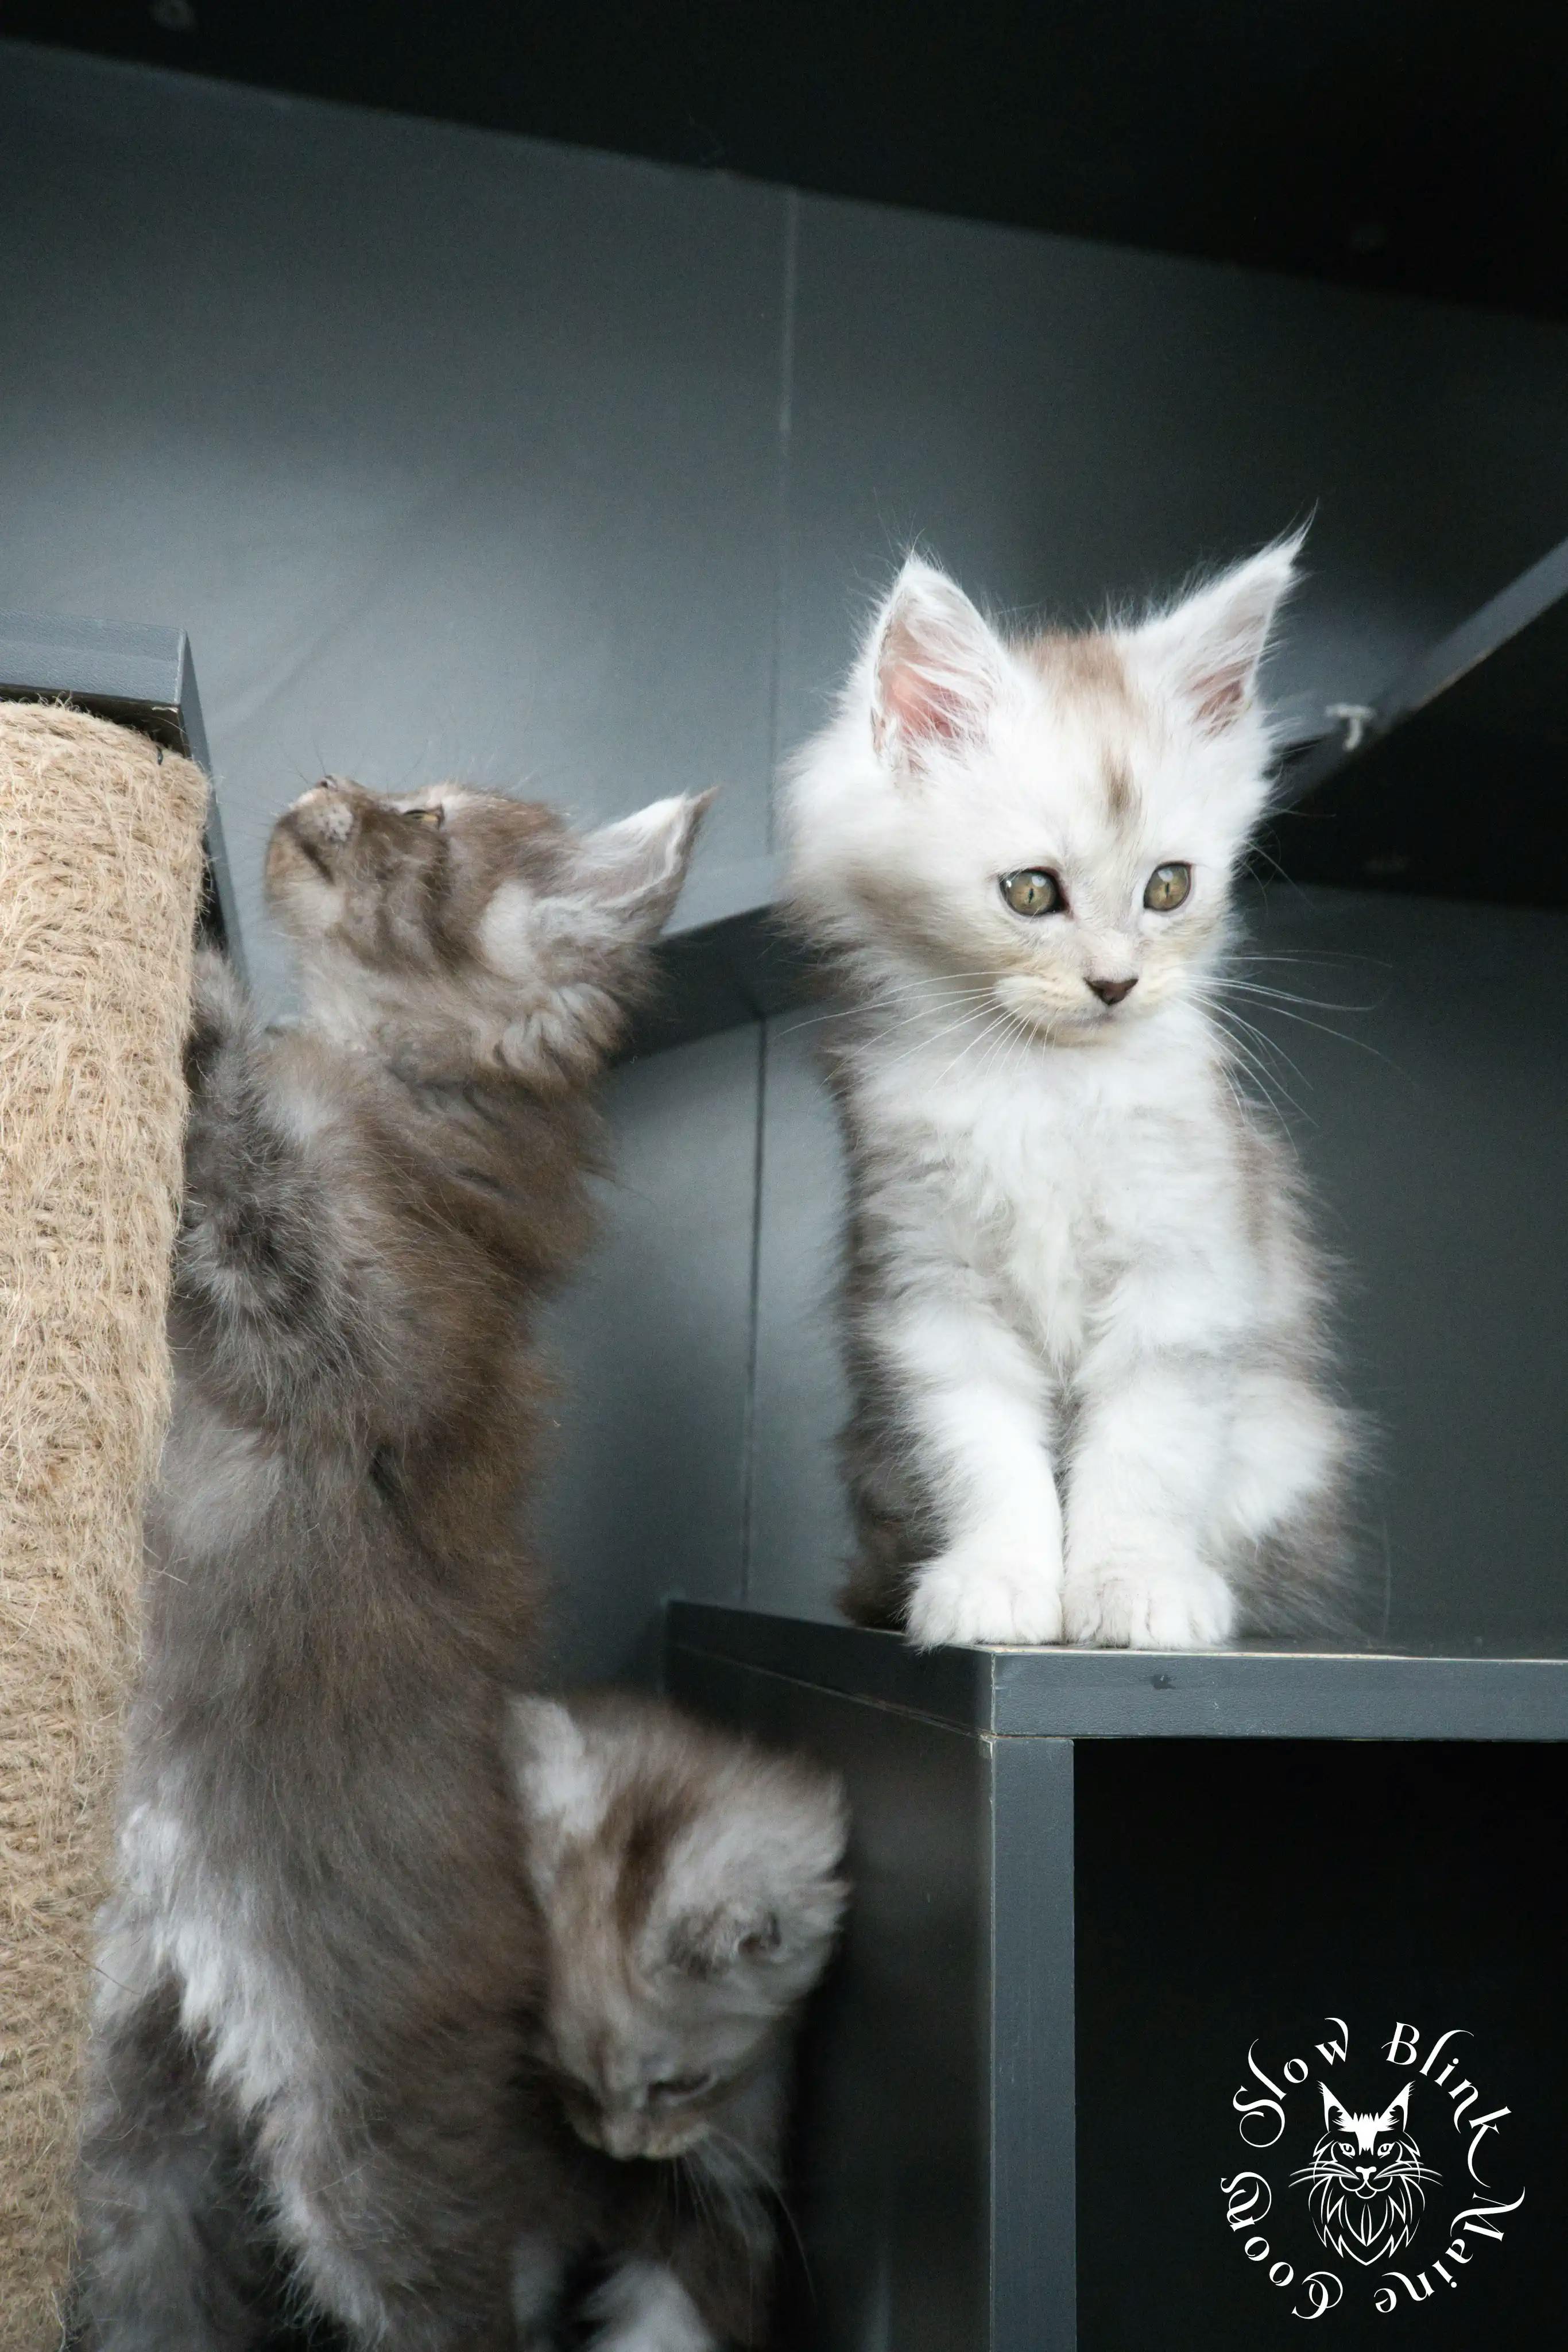 High Silver Maine Coon Kittens > black silver tabby maine coon kitten | ems code ns 22 23 24 25 | slowblinkmainecoons | 457